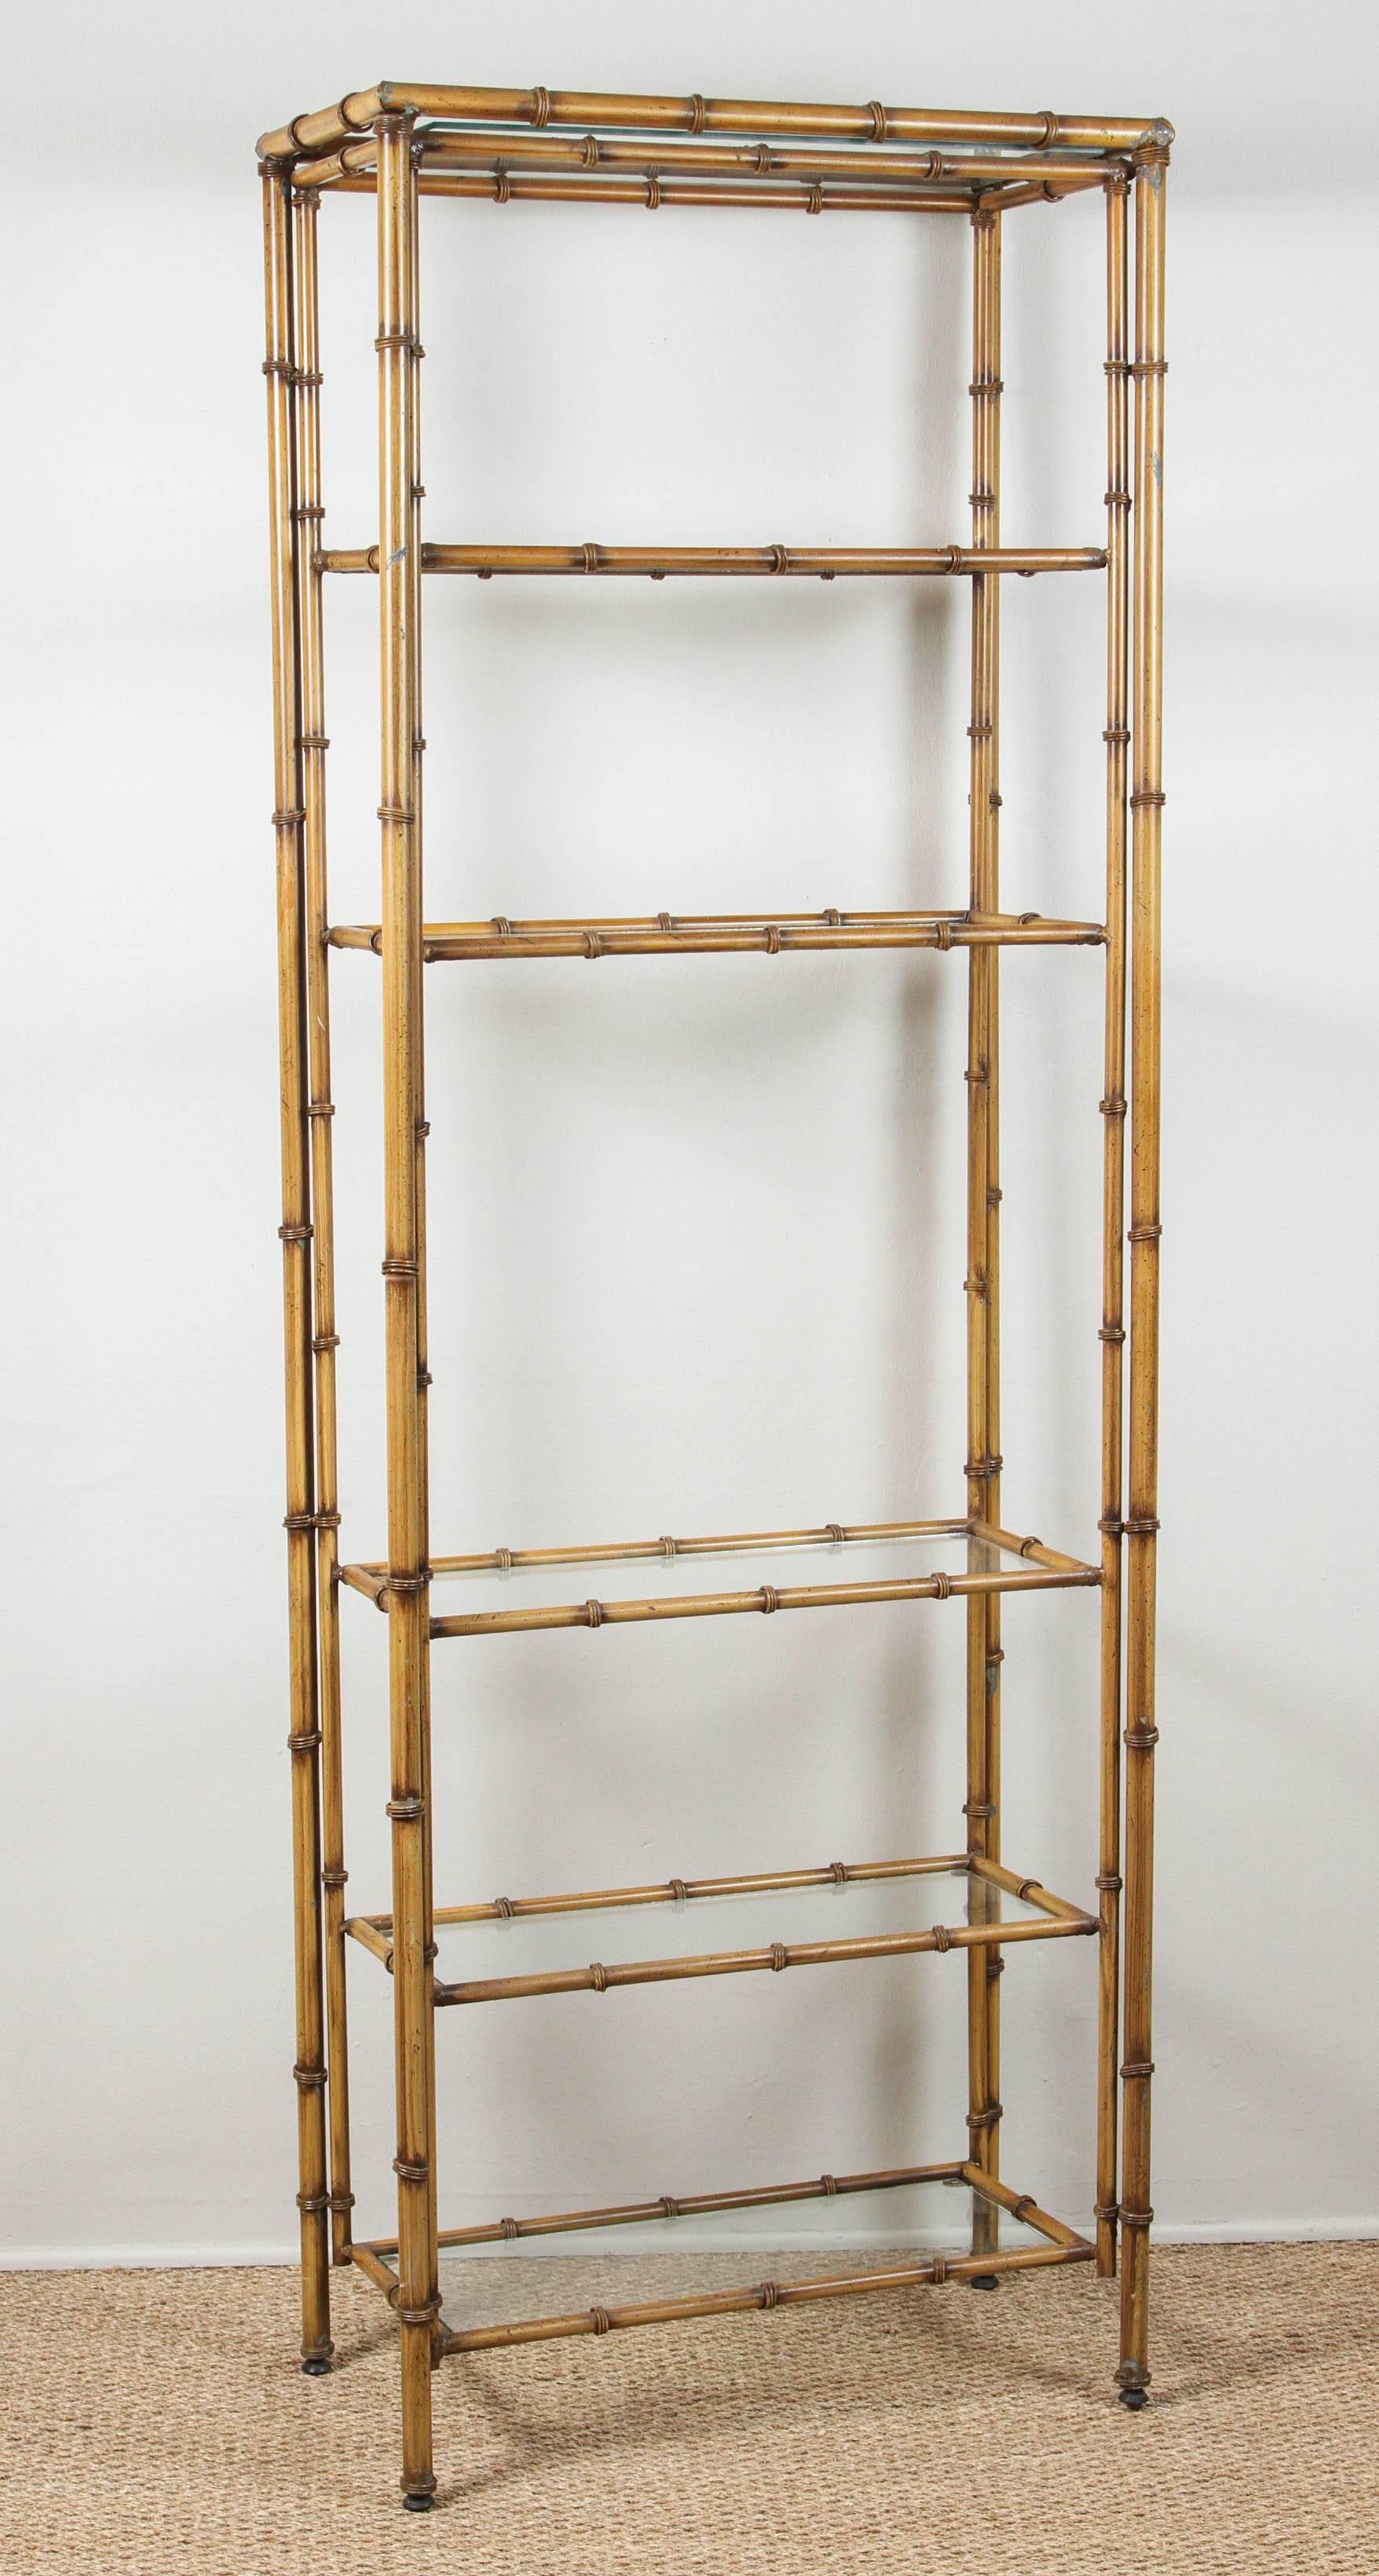 Vintage painted metal faux bamboo etagere with glass shelves.